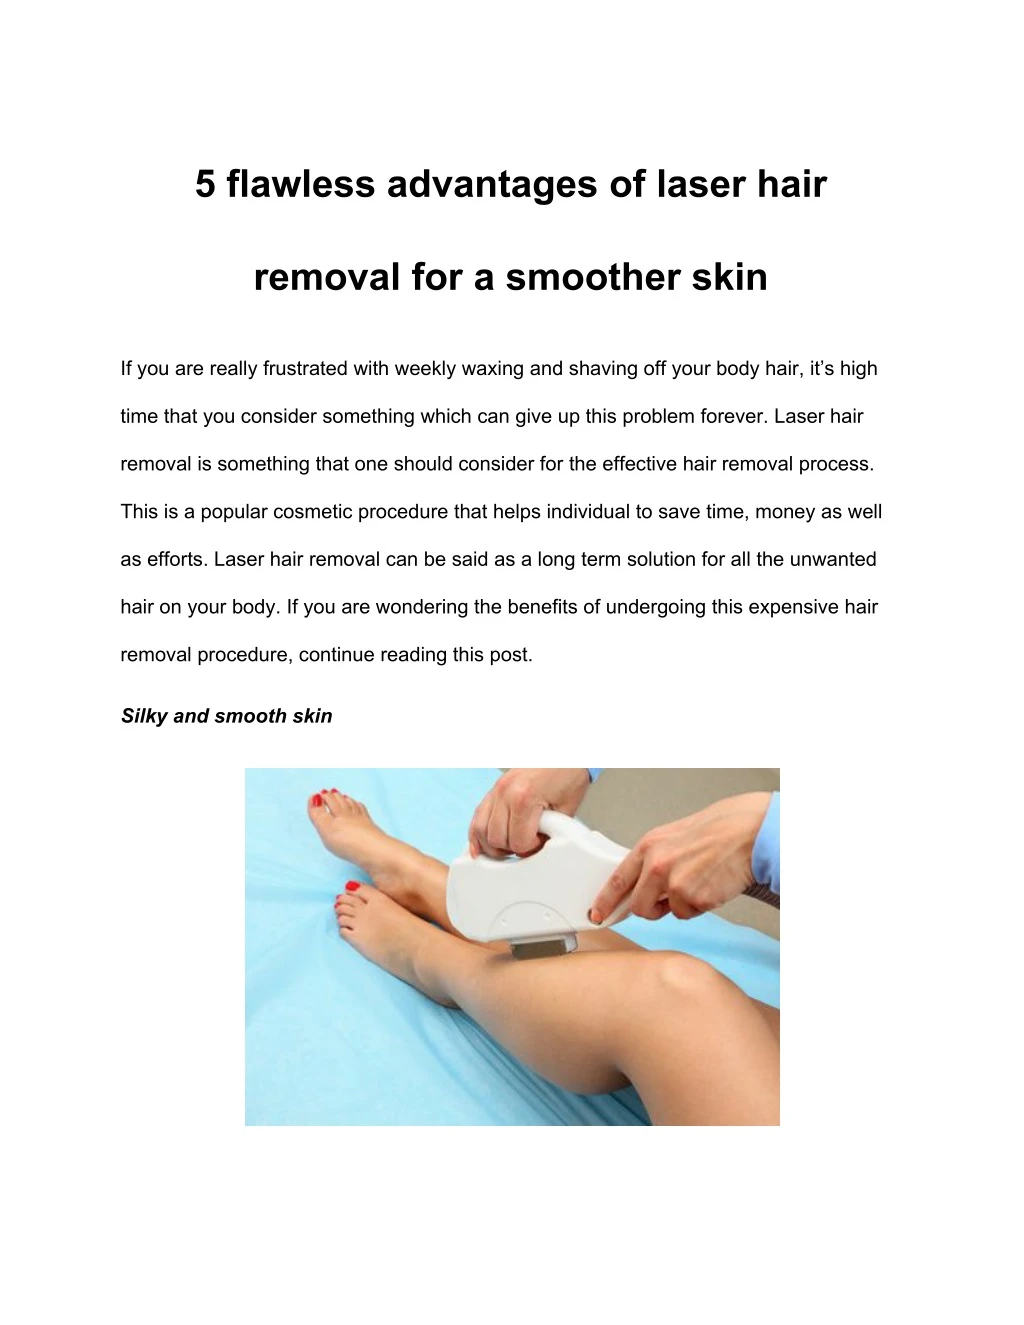 5 flawless advantages of laser hair